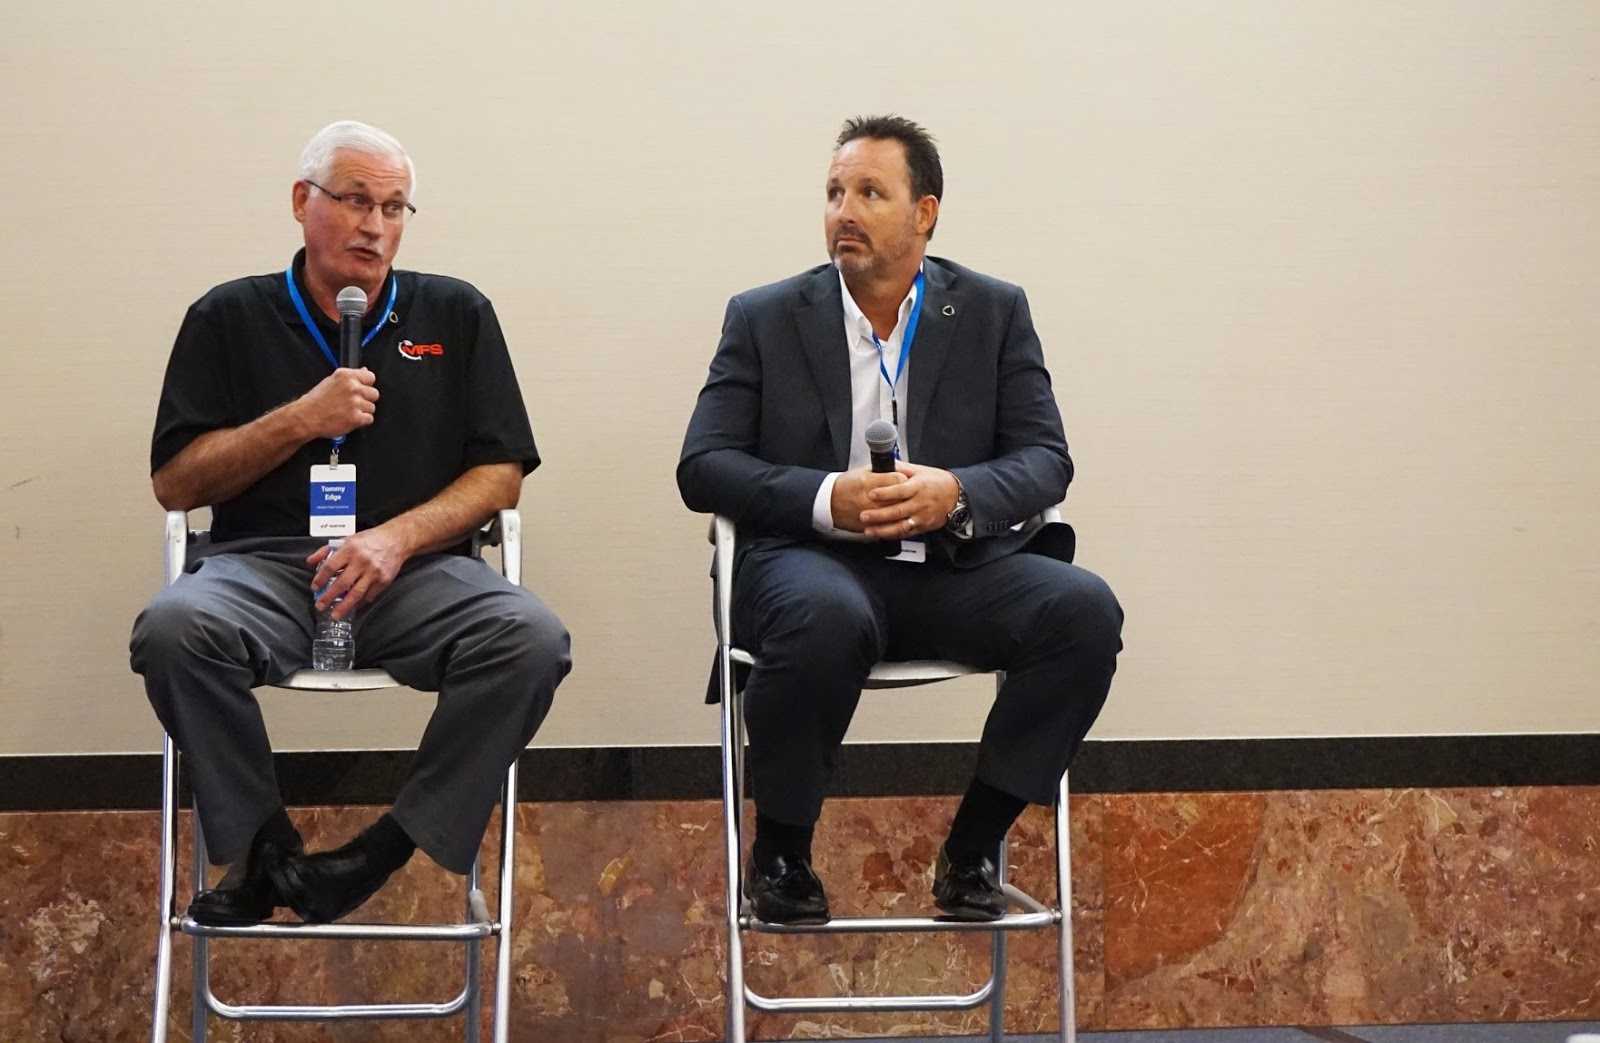 Tommy Edge and Anthony Weed take part in panel discussion during Telematics Los Angeles 2018